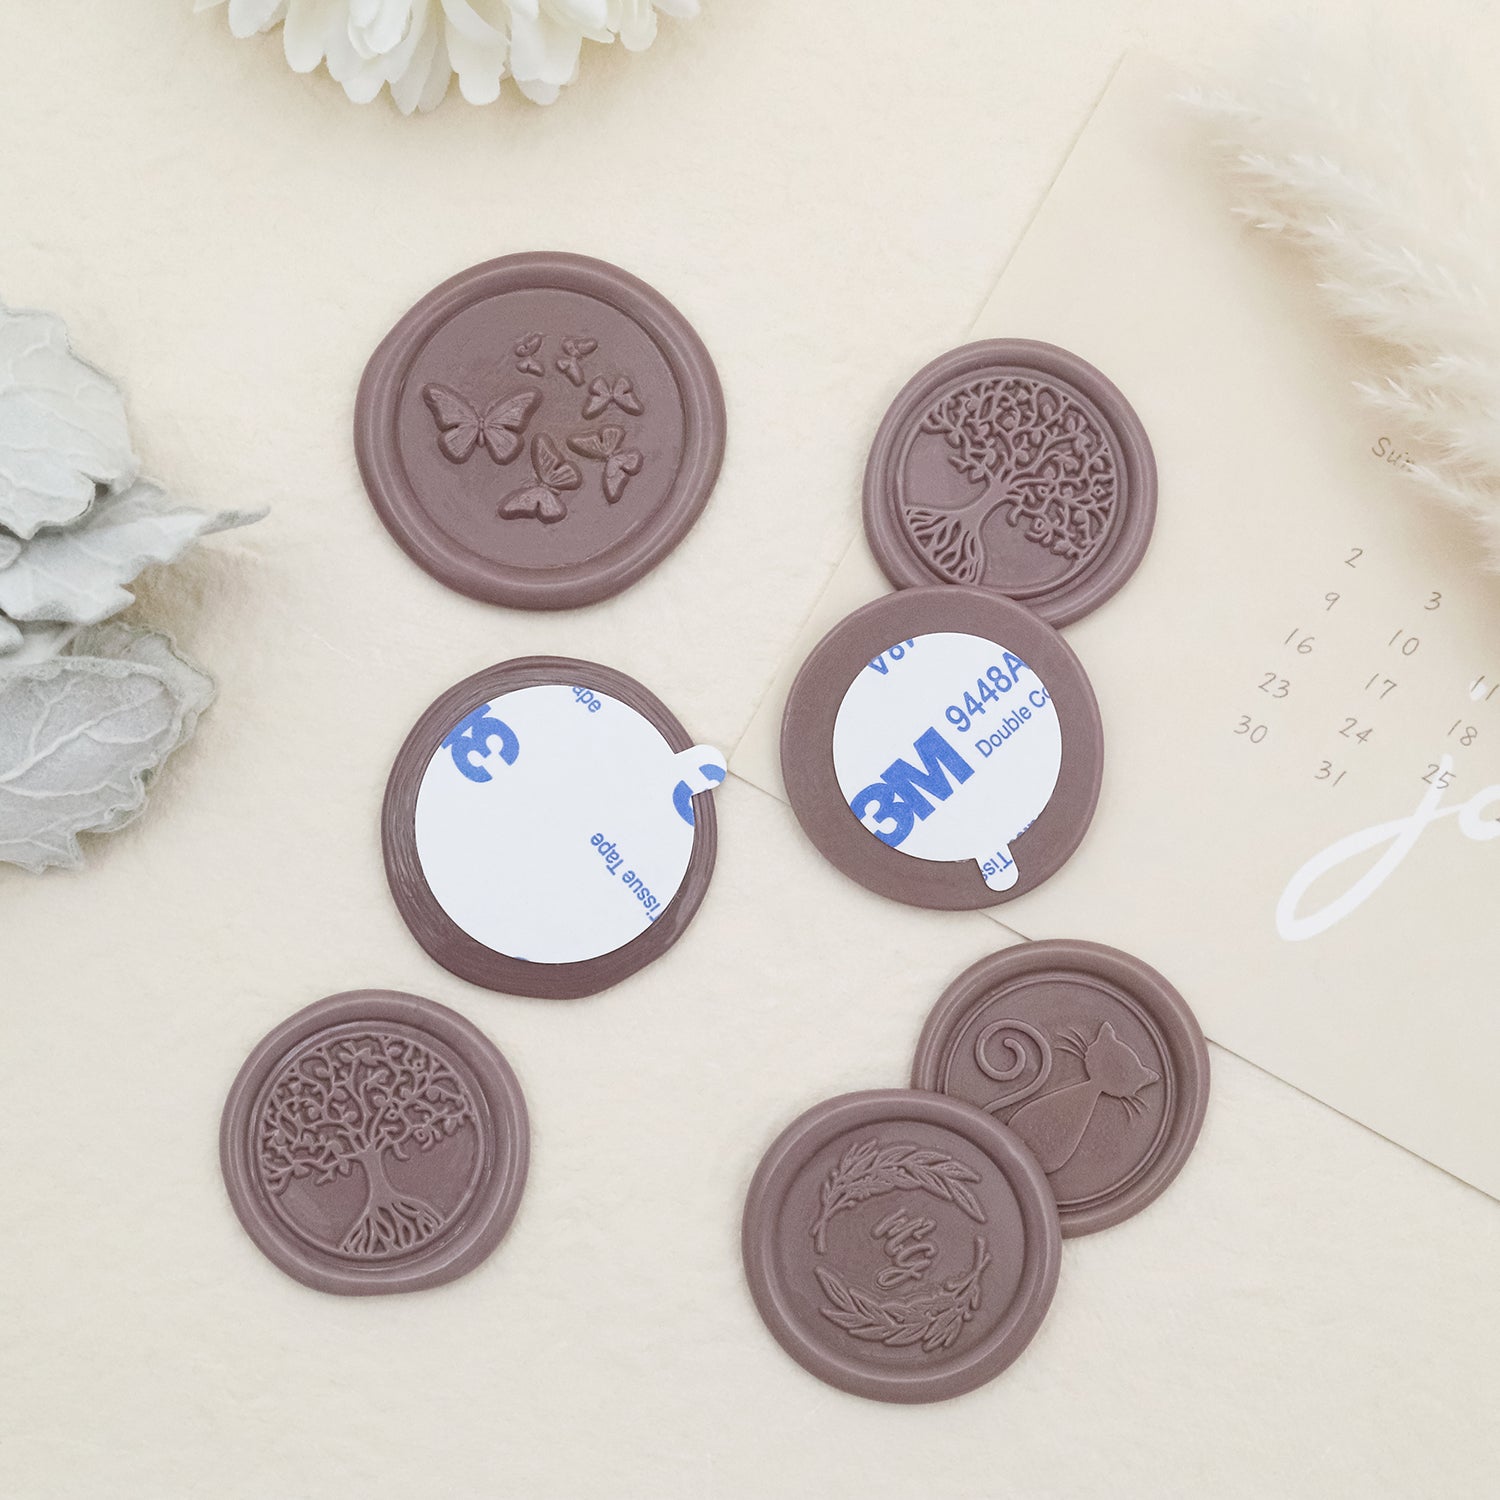 Wax Seal Sticker Printing Services